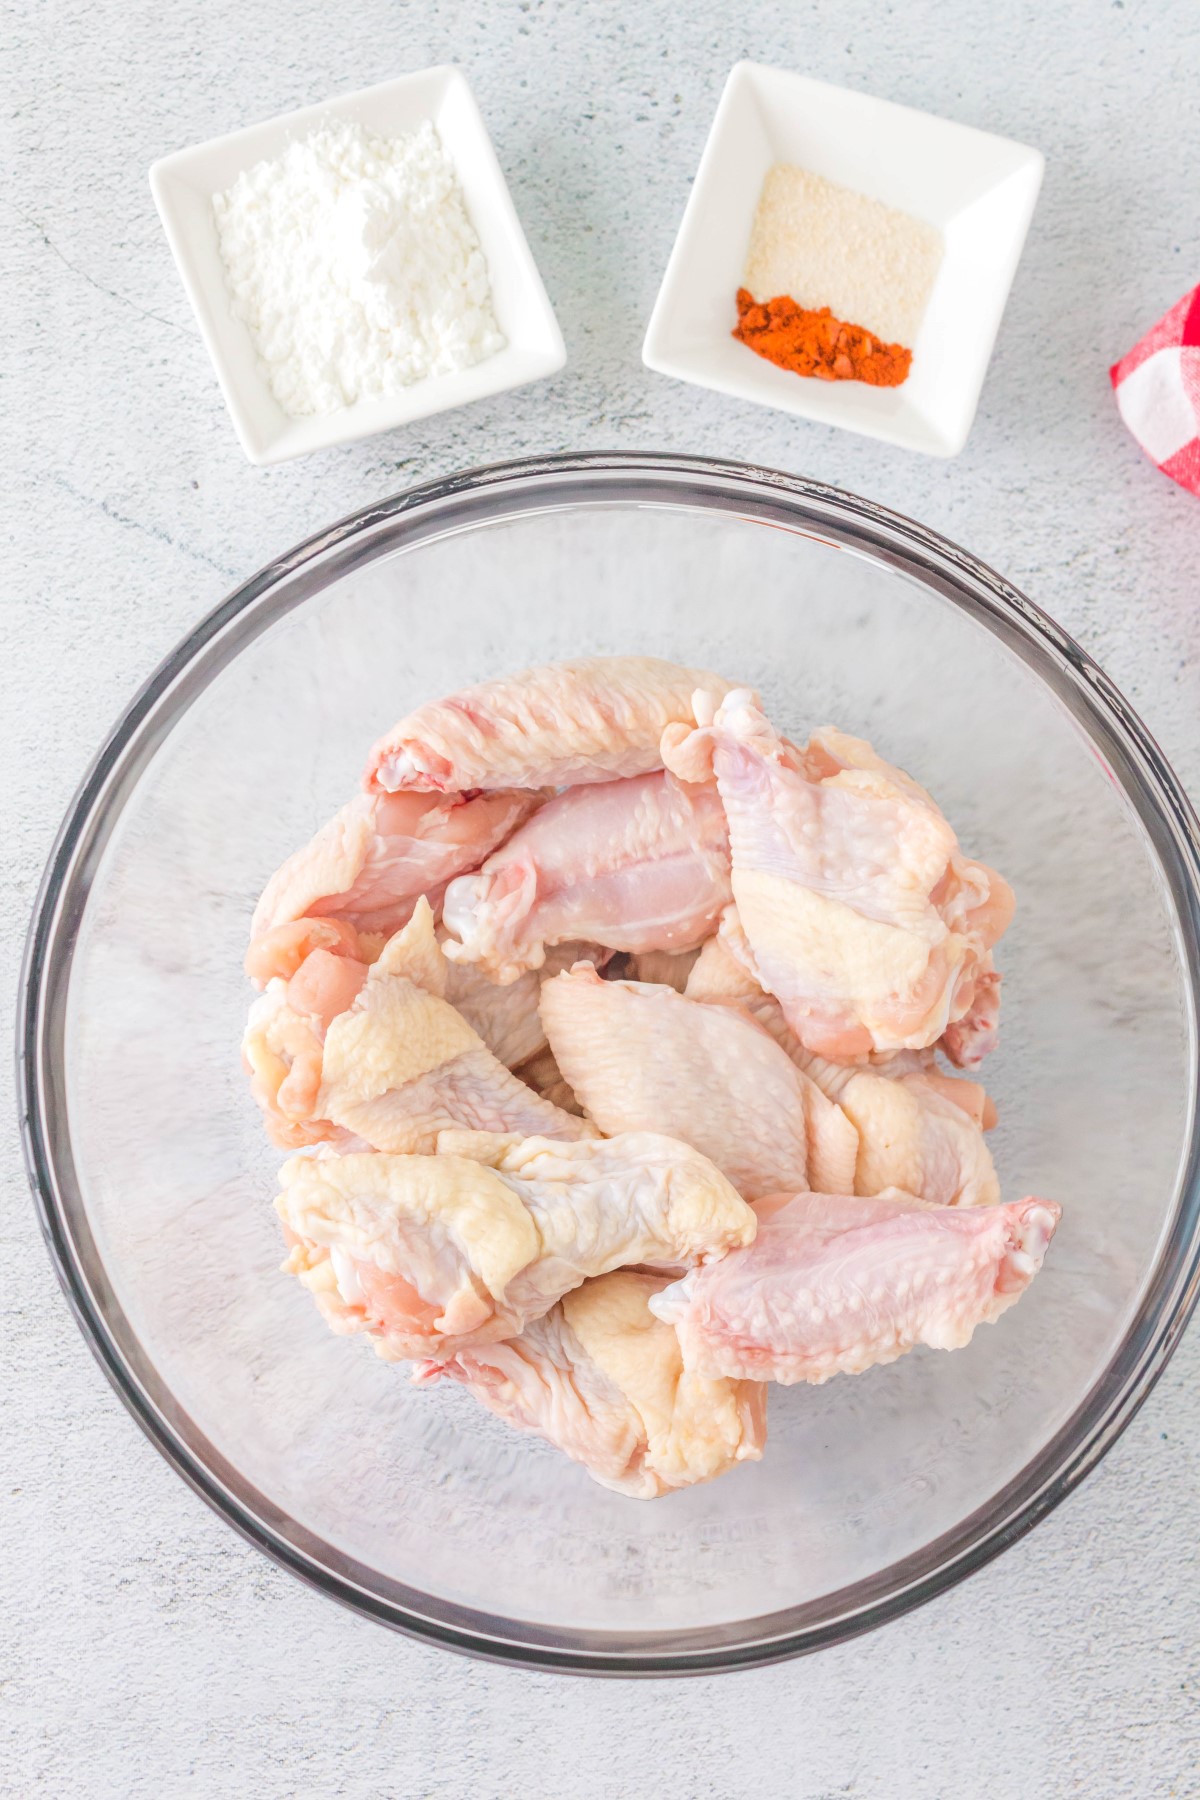 Ingredients to make crispy BBQ chicken wings in bowls on a white countertop.